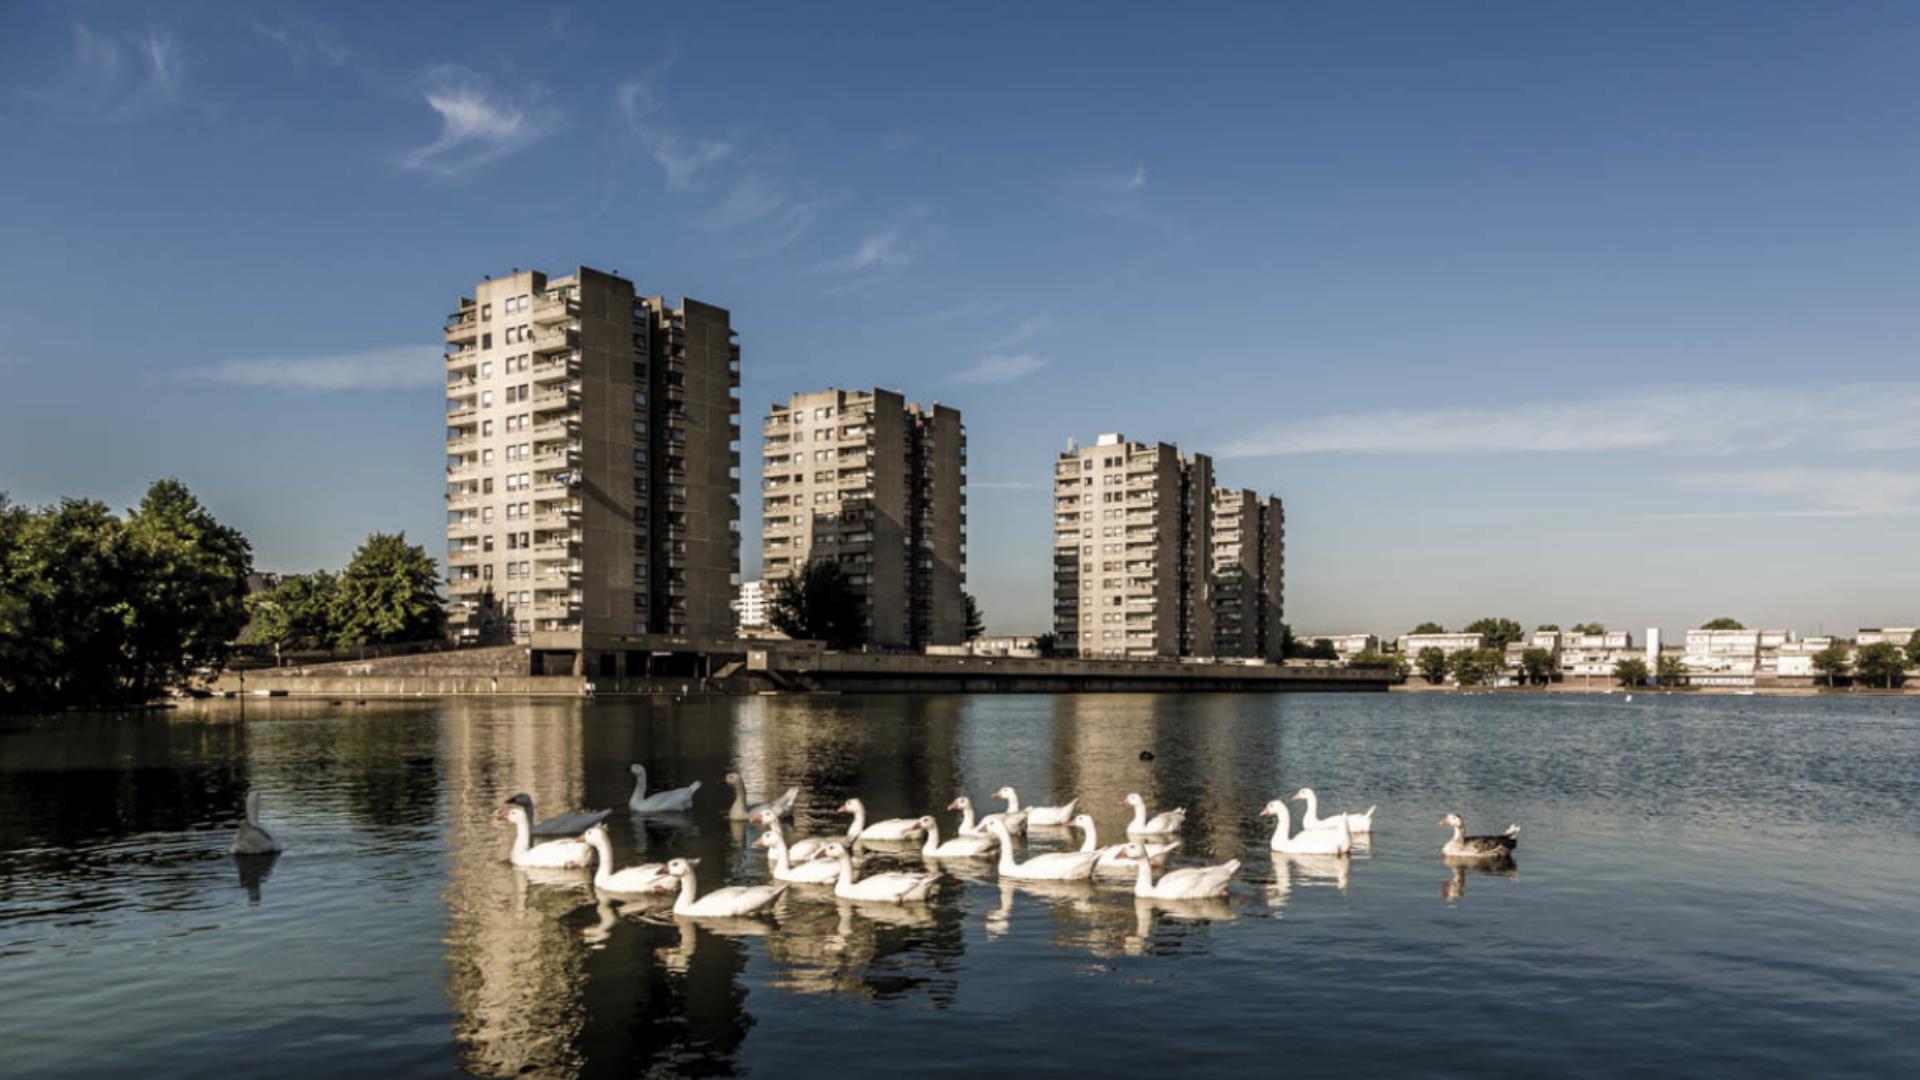 Swans swim in the lake in Thamesmead on a sunny day.